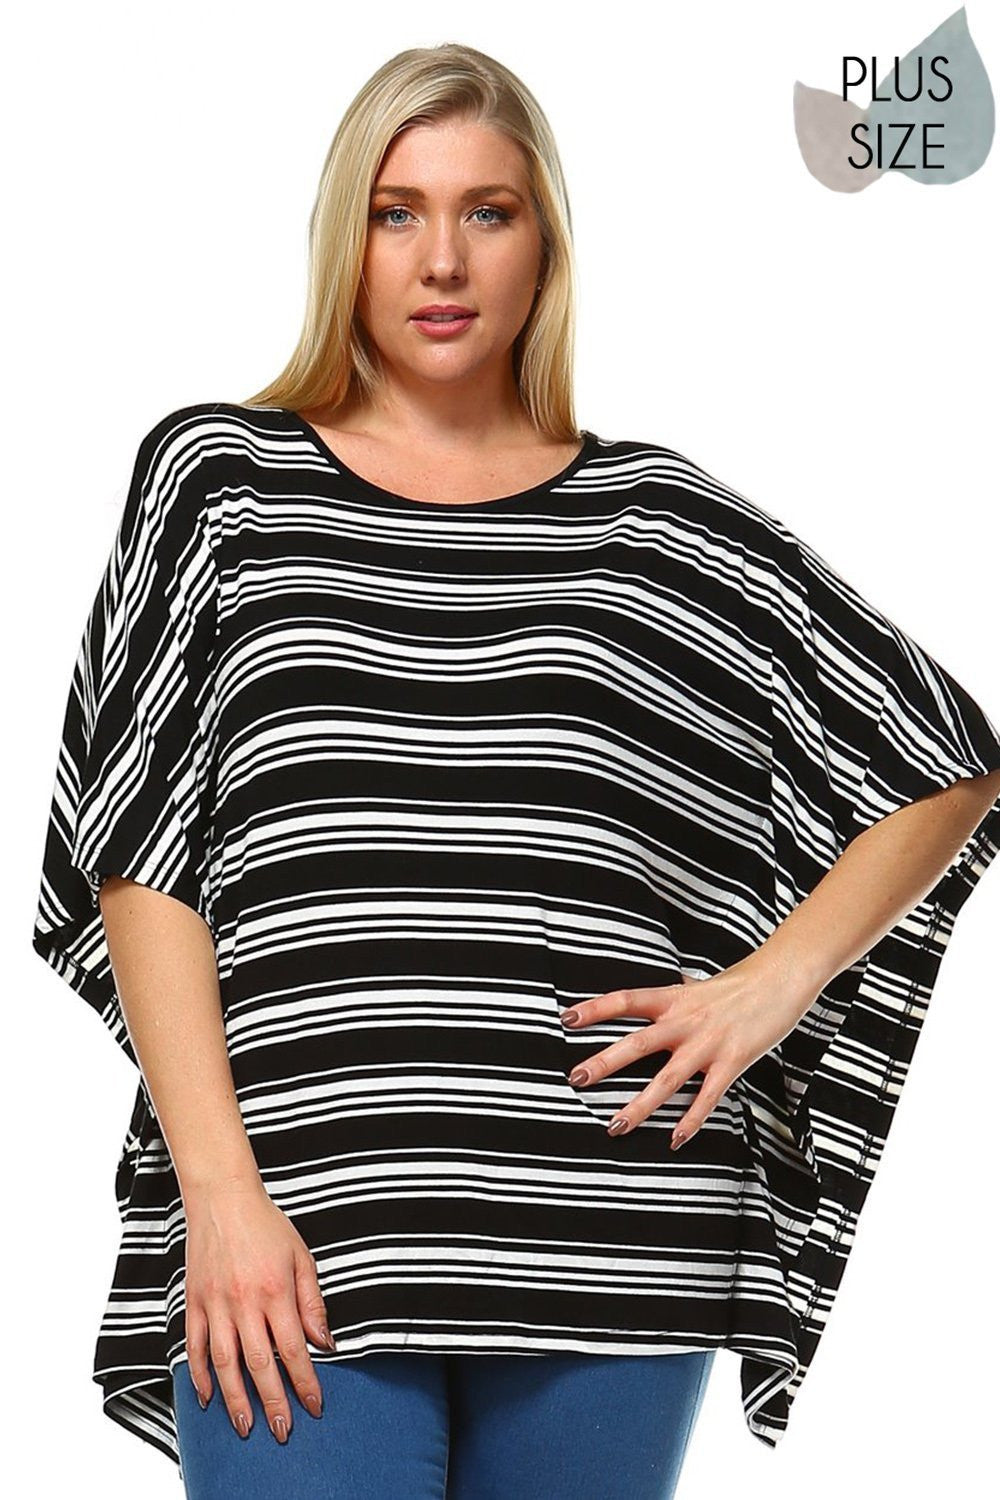 beautiful woman wearing a black and white Striped, round neckline, 3/4 length flutter sleeve, top with asymmetrical hem Perfect for Spring & Summer, Evening wear, Festival, Beach Day, Vacation, Dance, Poolside Parties